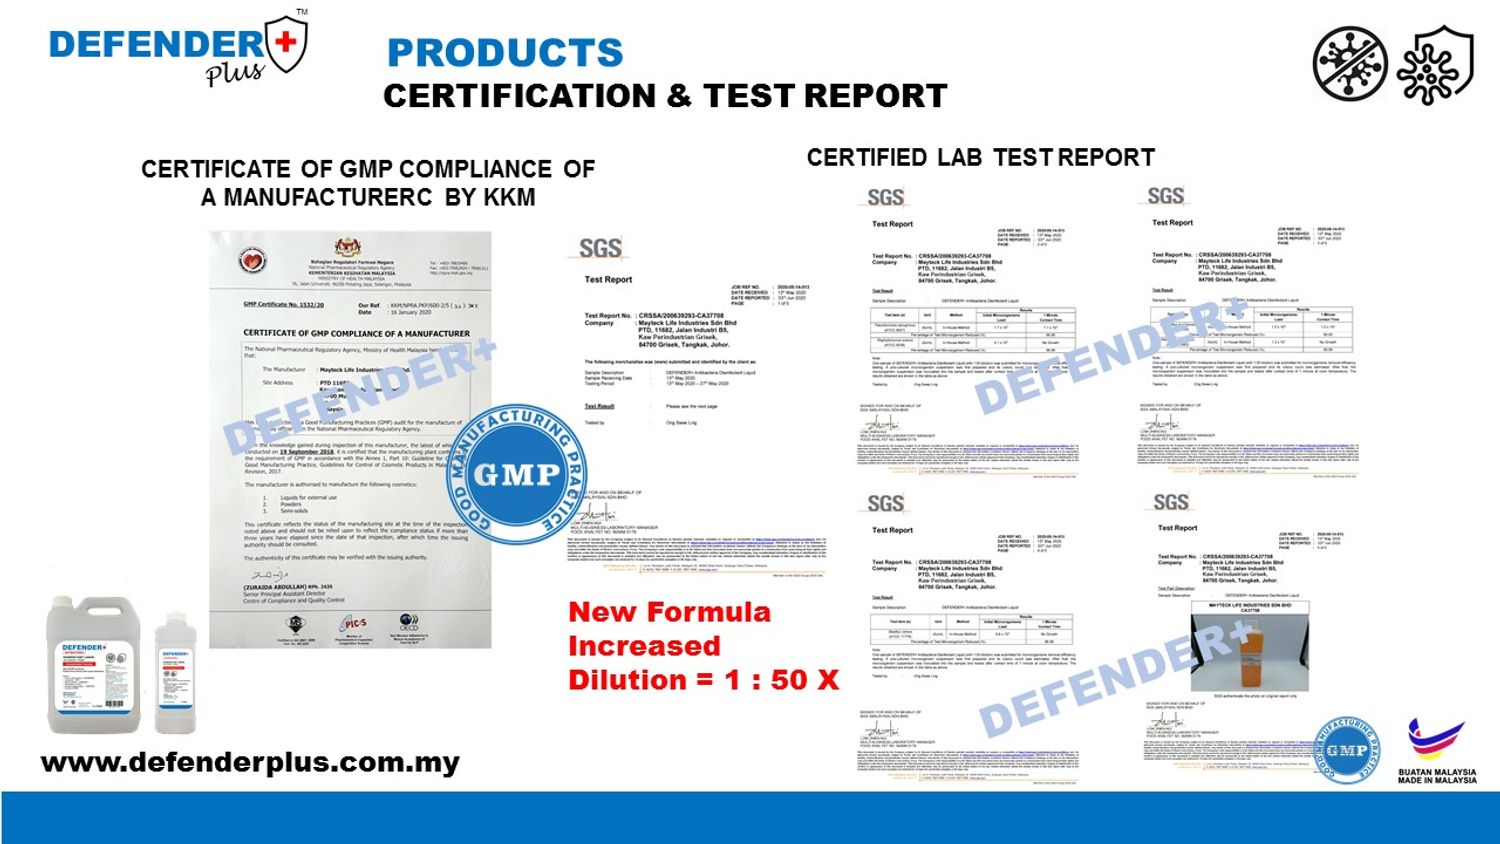 DEFENDER+ PLUS MALAYSIA - DEFENDER+ PLUS ALL NEW 1:50X CERTIFIED TEST REPORT